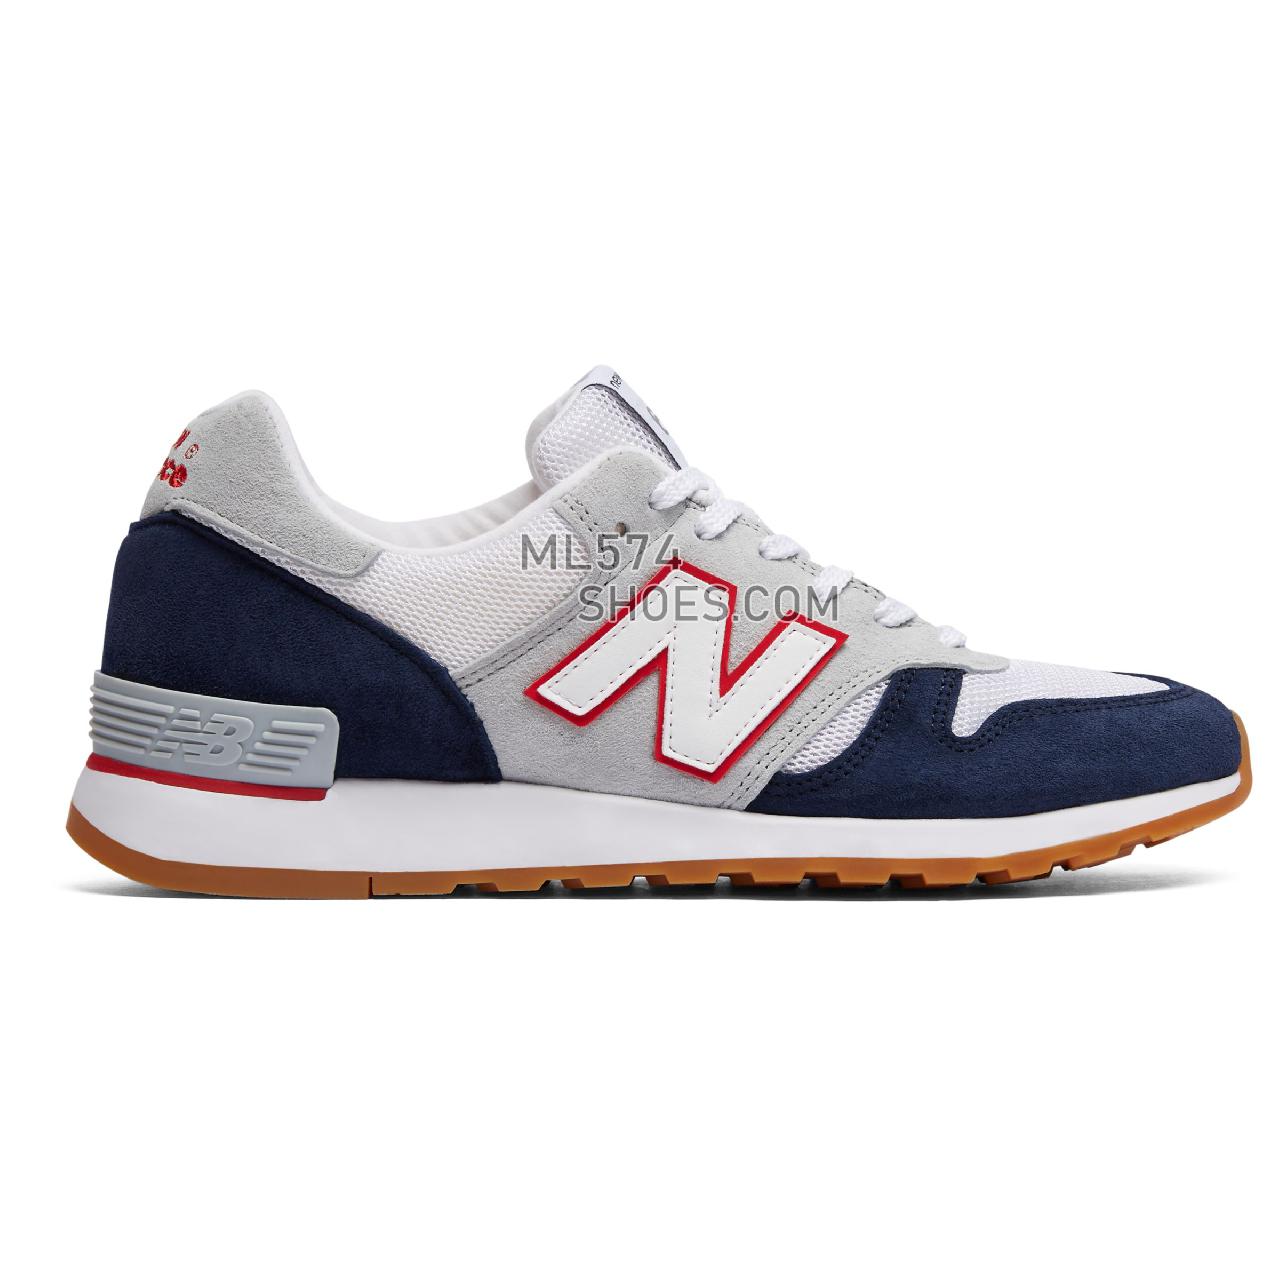 New Balance Made in UK 670 - Men's Made in USA And UK Sneakers - Grey with Blue and White - M670GNW